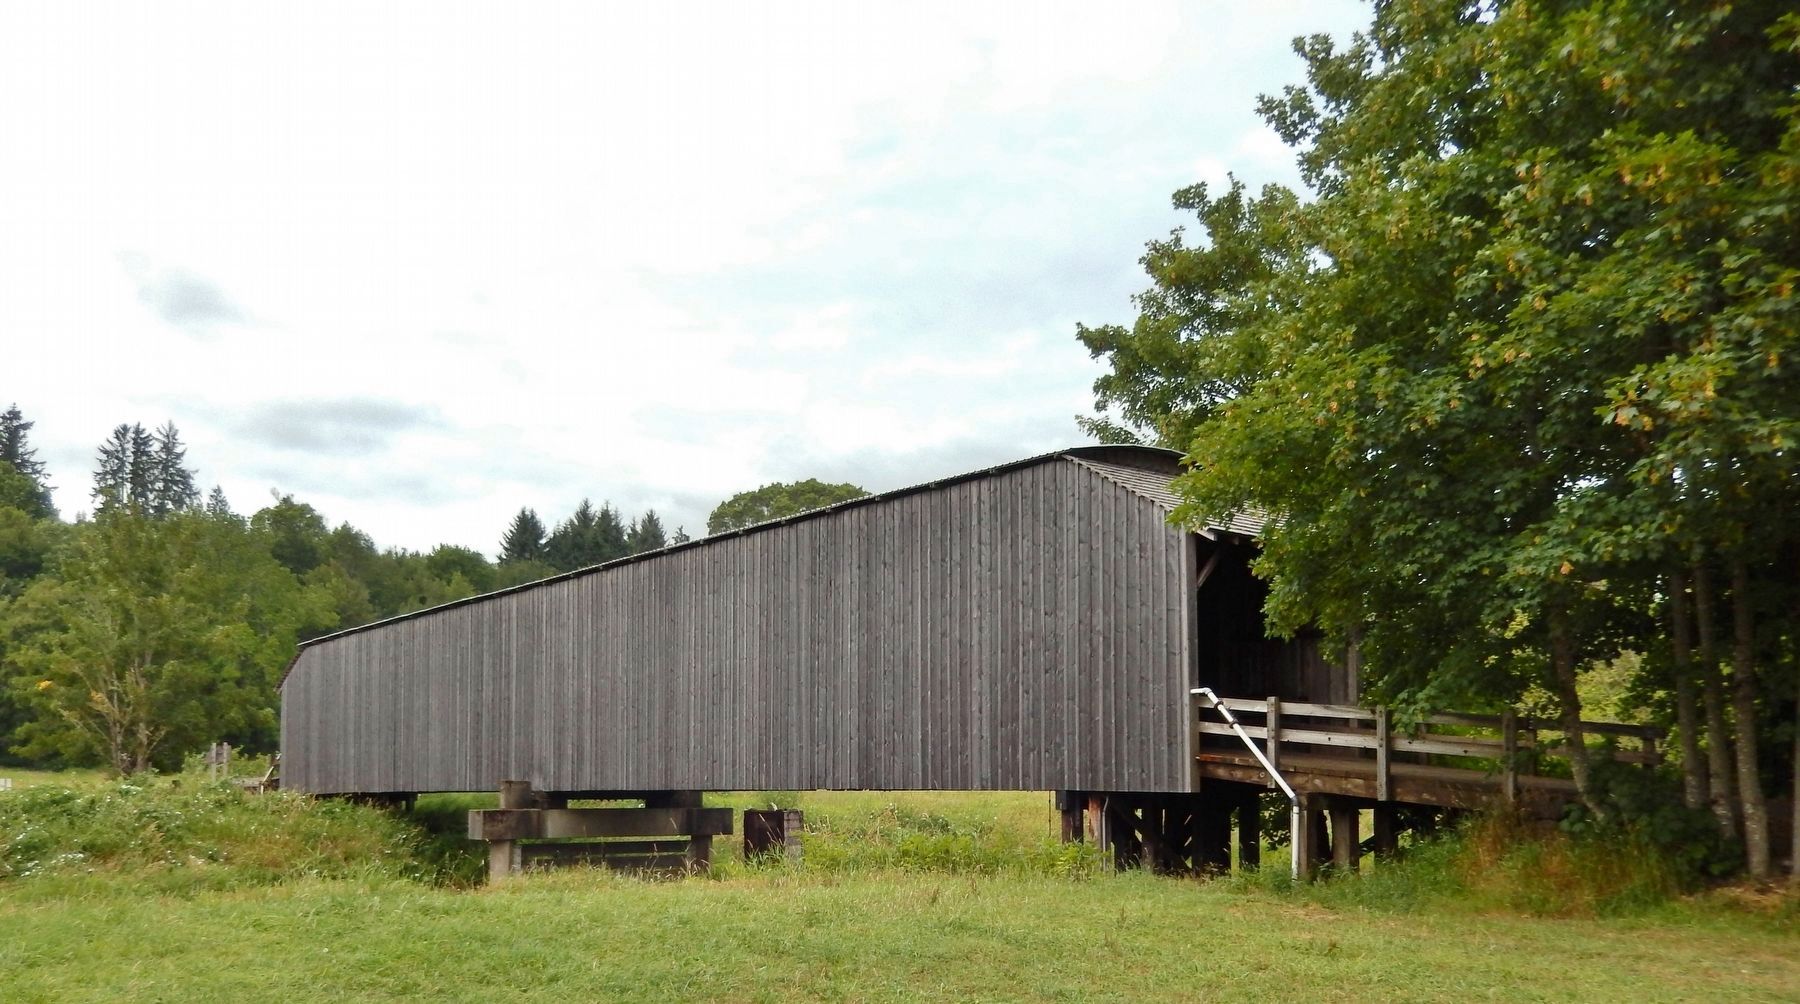 Grays River Covered Bridge (<i>view from Ahlberg Park marker</i>) image. Click for full size.